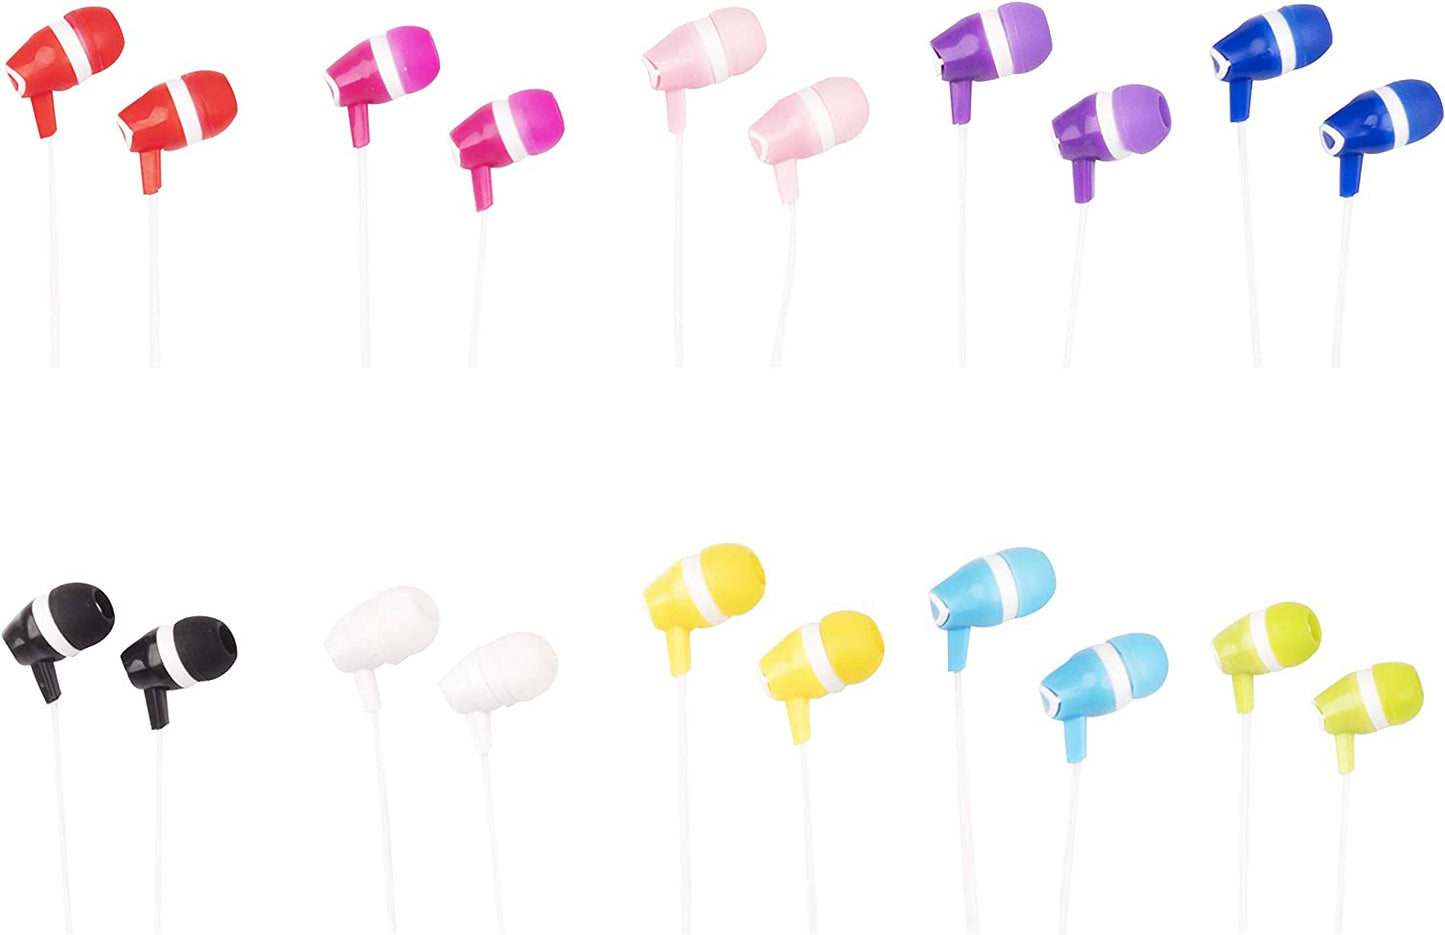 100 Pack of JustJamz Bubbles, Colorful in-Ear Earbuds, Assorted Colors (Europe)